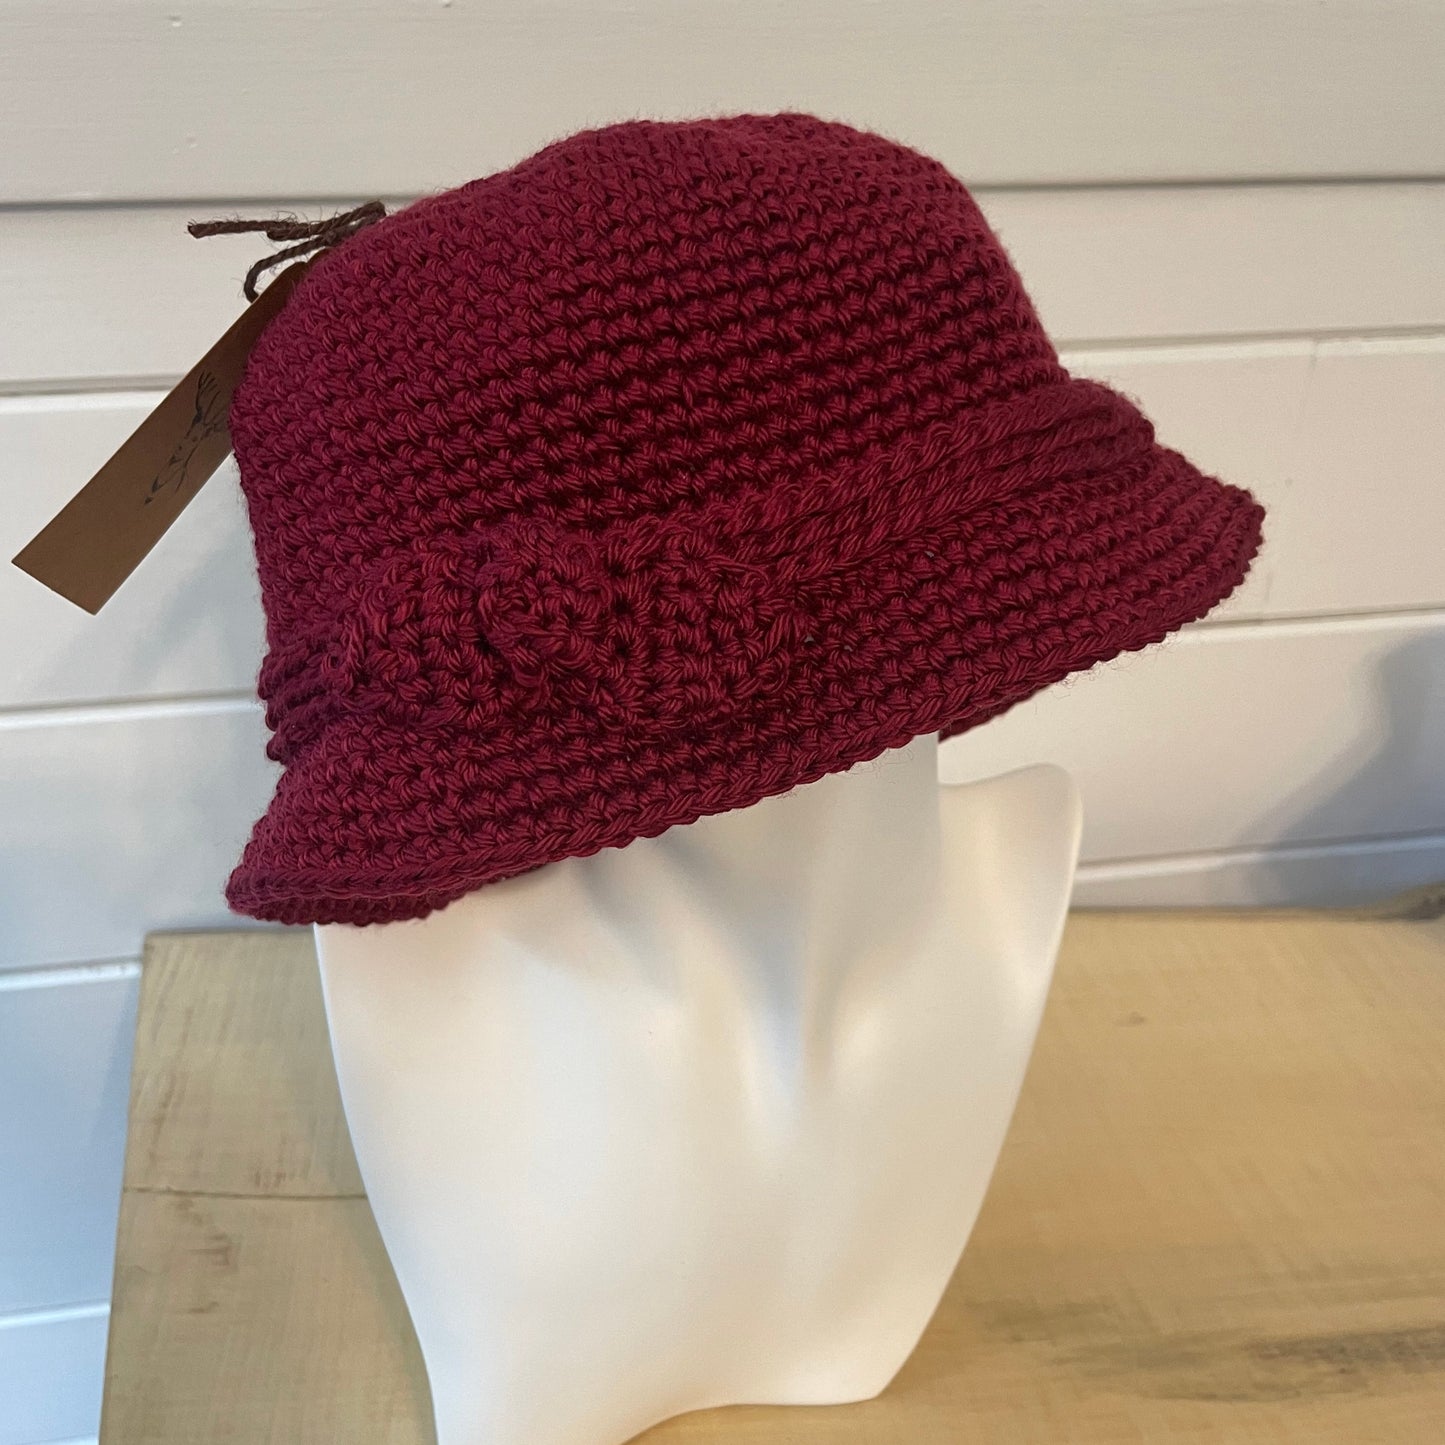 Vintage Retro Style Cloche Hat with Bow Accent in Red Wine Maroon Hand Crocheted Knit Fall Winter Bohemian Boho--shown with bow on right